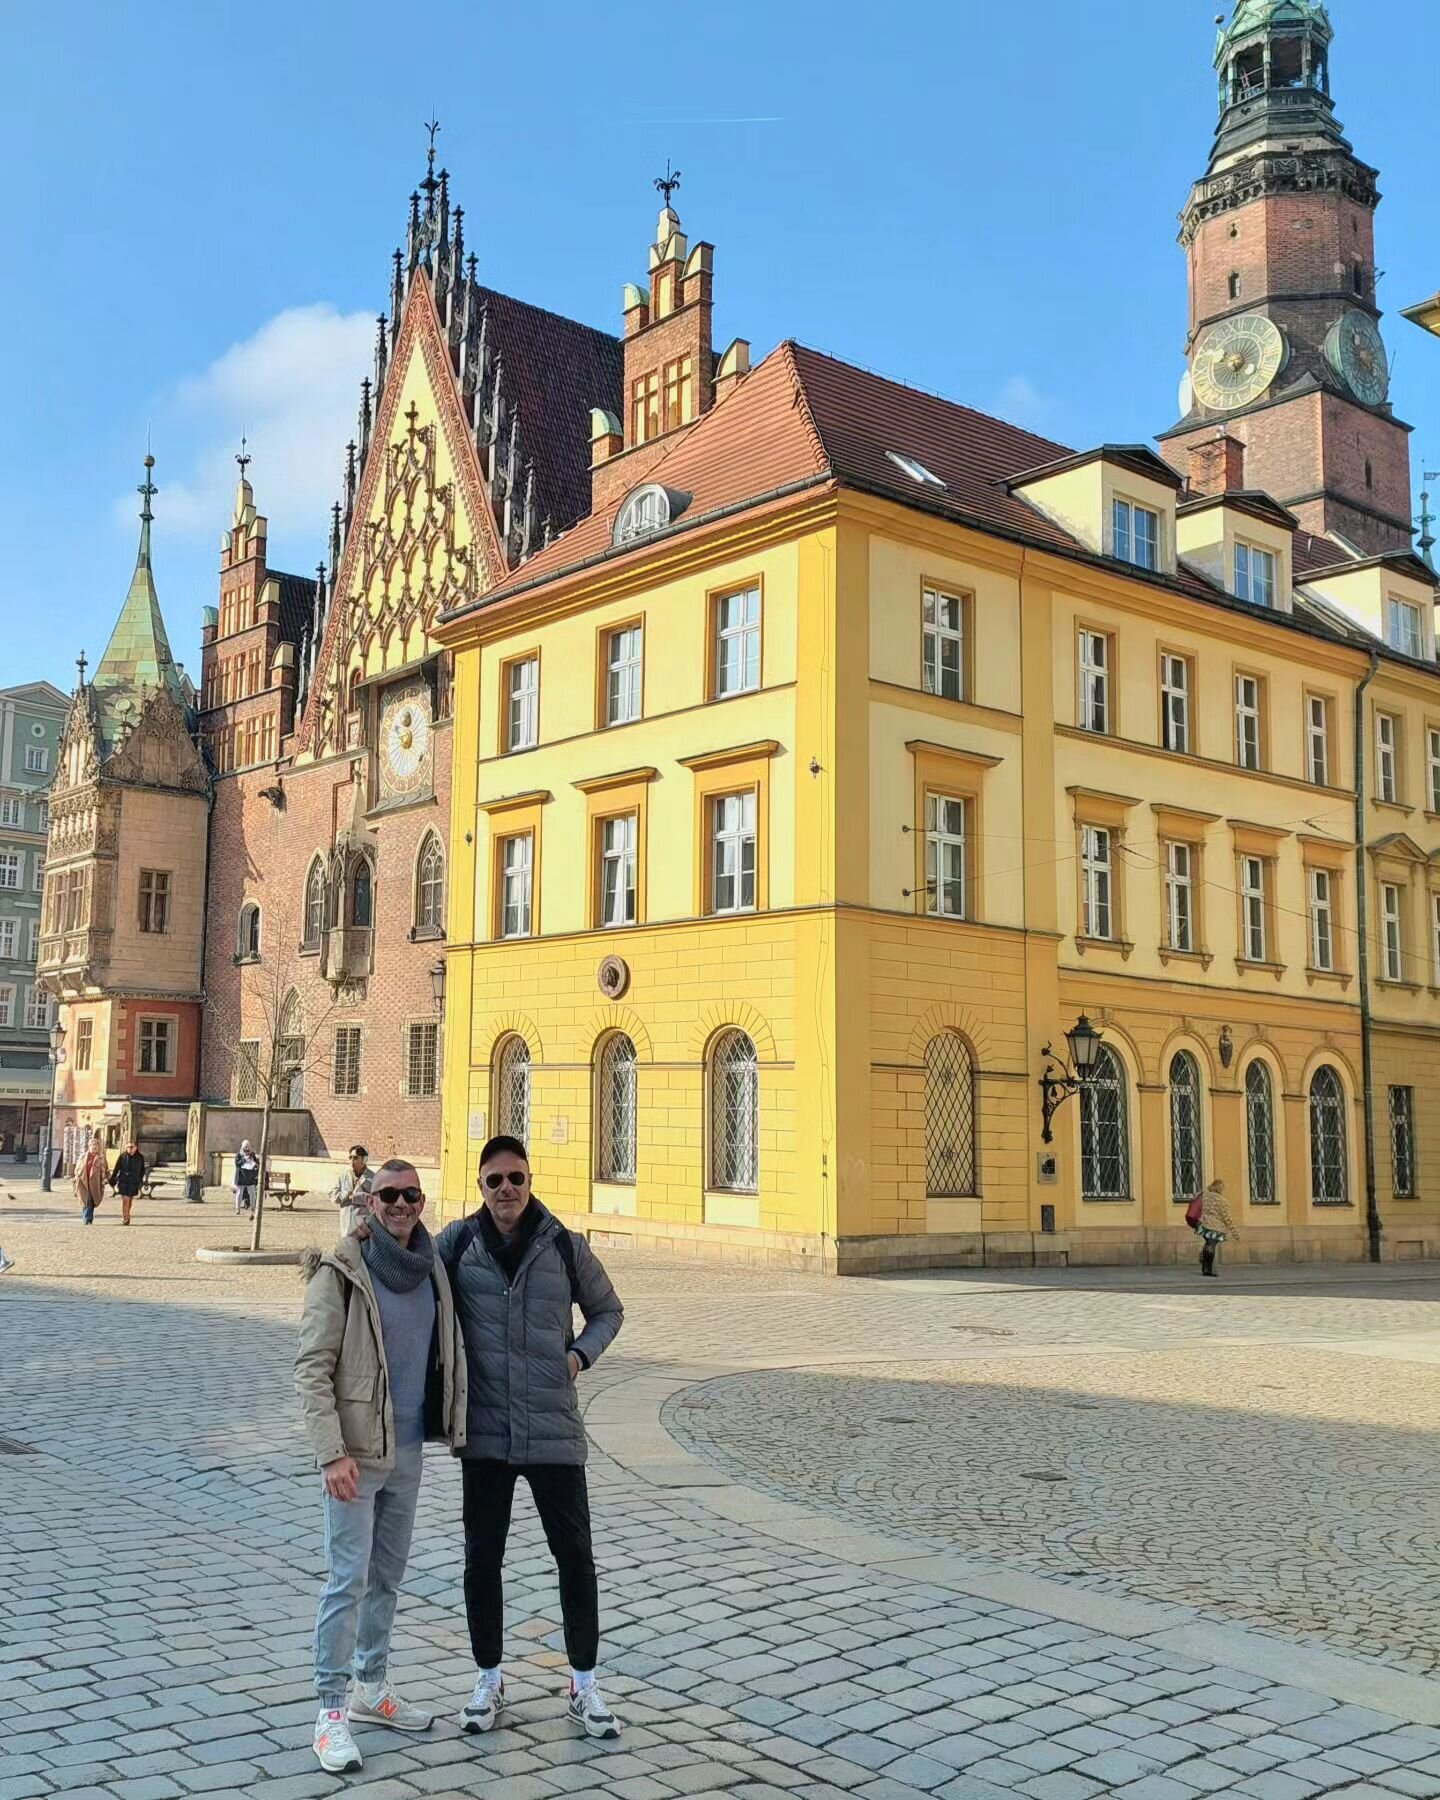 📍 Another day in Wroclaw, with plenty of sunshine! And here we are, in the central square with these beautiful colors!
Have you ever visited Wroclaw? 😍🏳️&zwj;🌈 

🏳️&zwj;🌈 Artur &amp; Jorge 👬 #gaymenonthego 
.
.
.
.
.
.
.
.
.
.
.
.
.
.
.
#gaytr